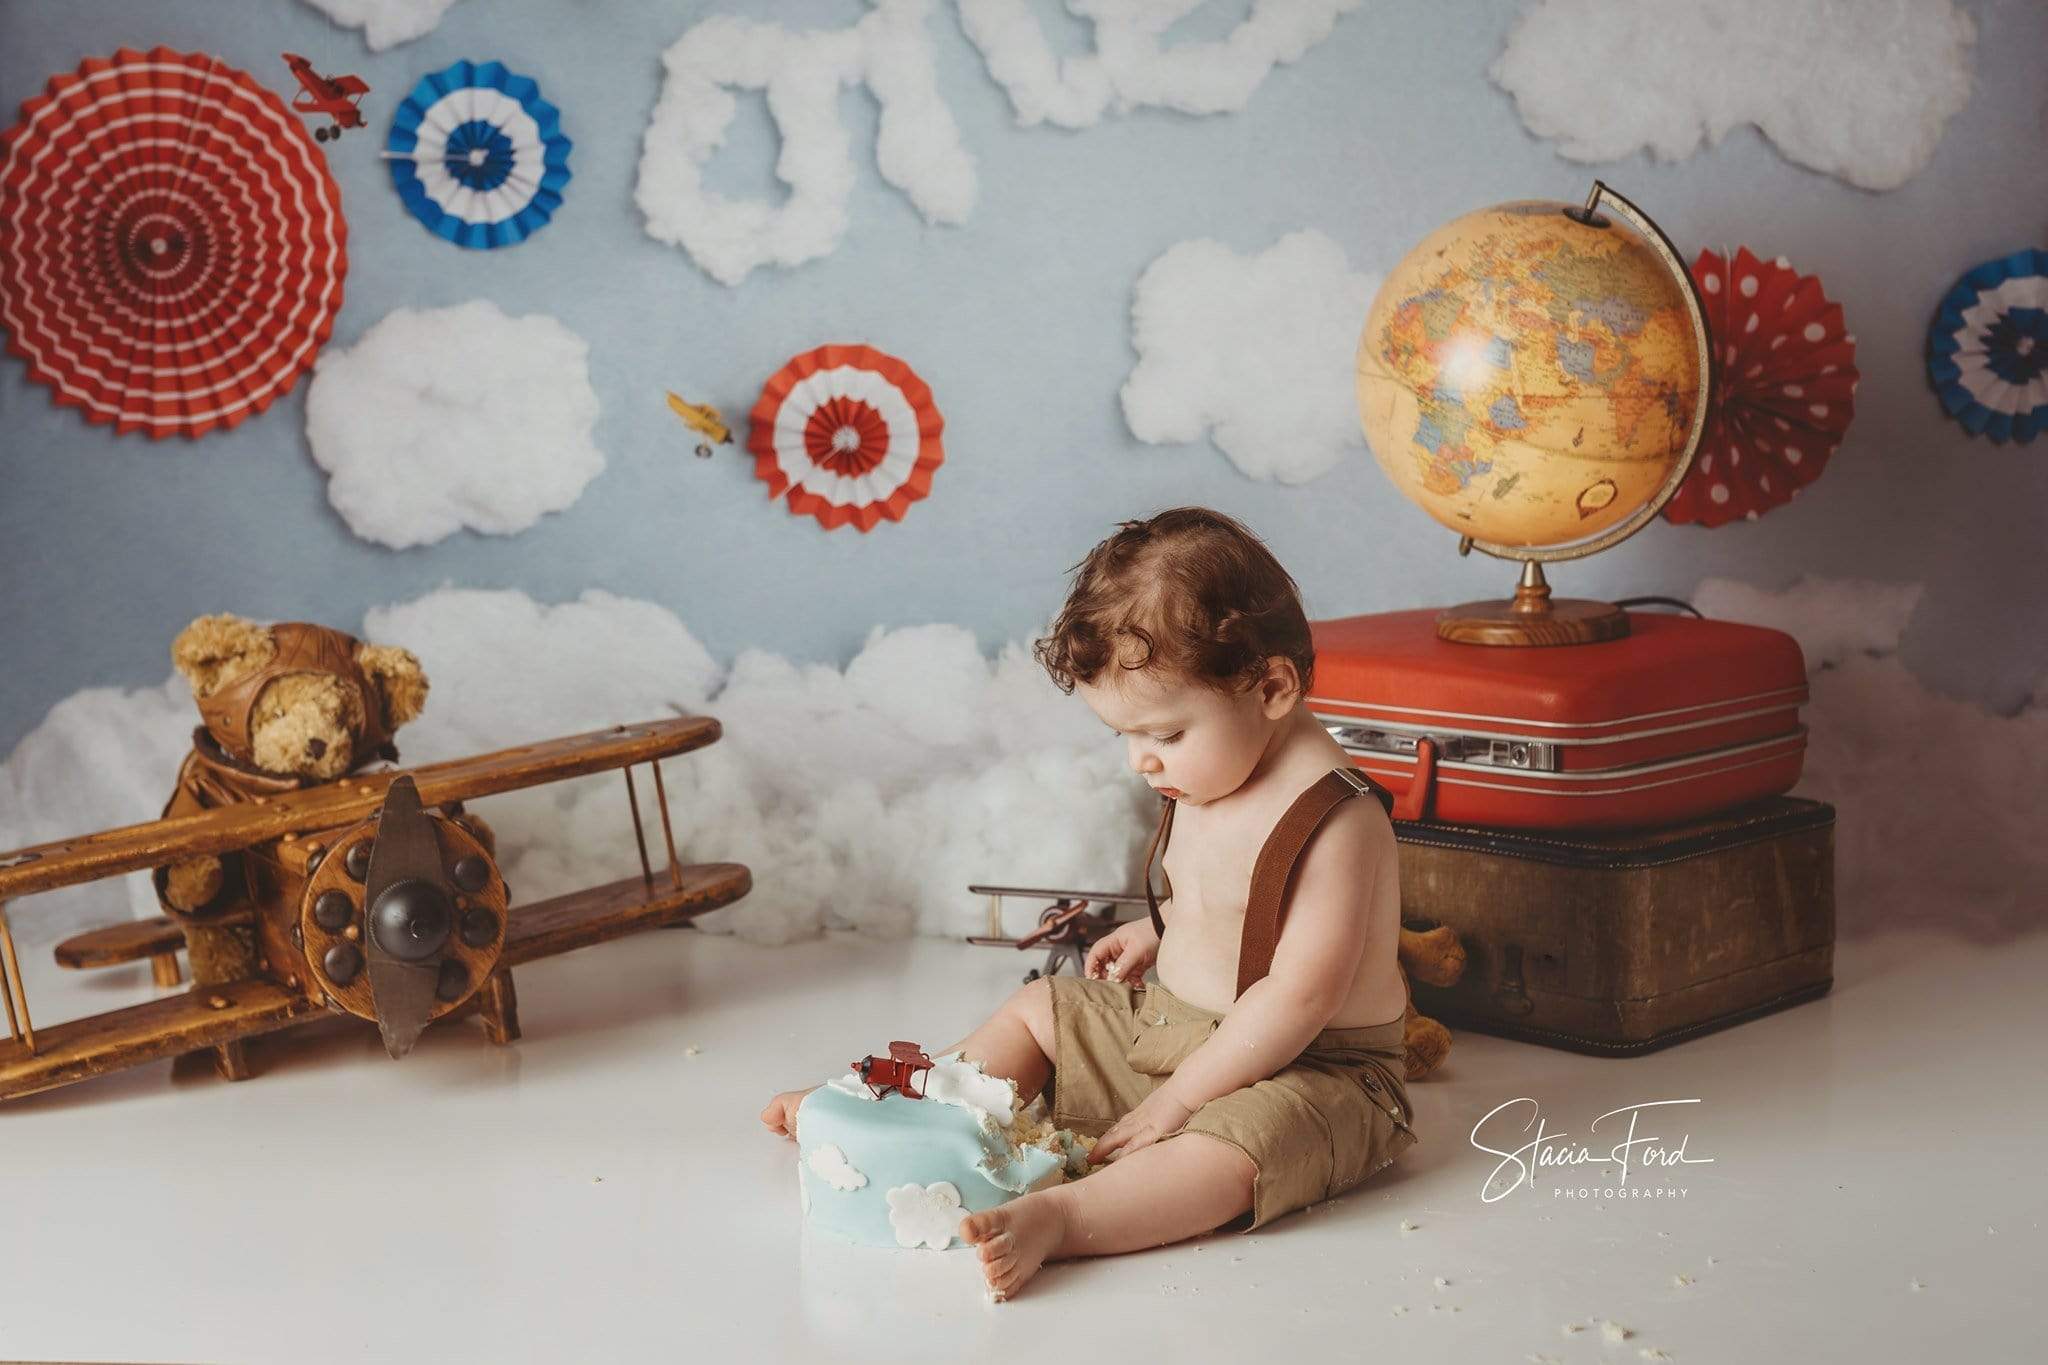 Katebackdrop£ºKate Time Flies Clouds Birthday Children Backdrop for Photography Designed by Lisa B